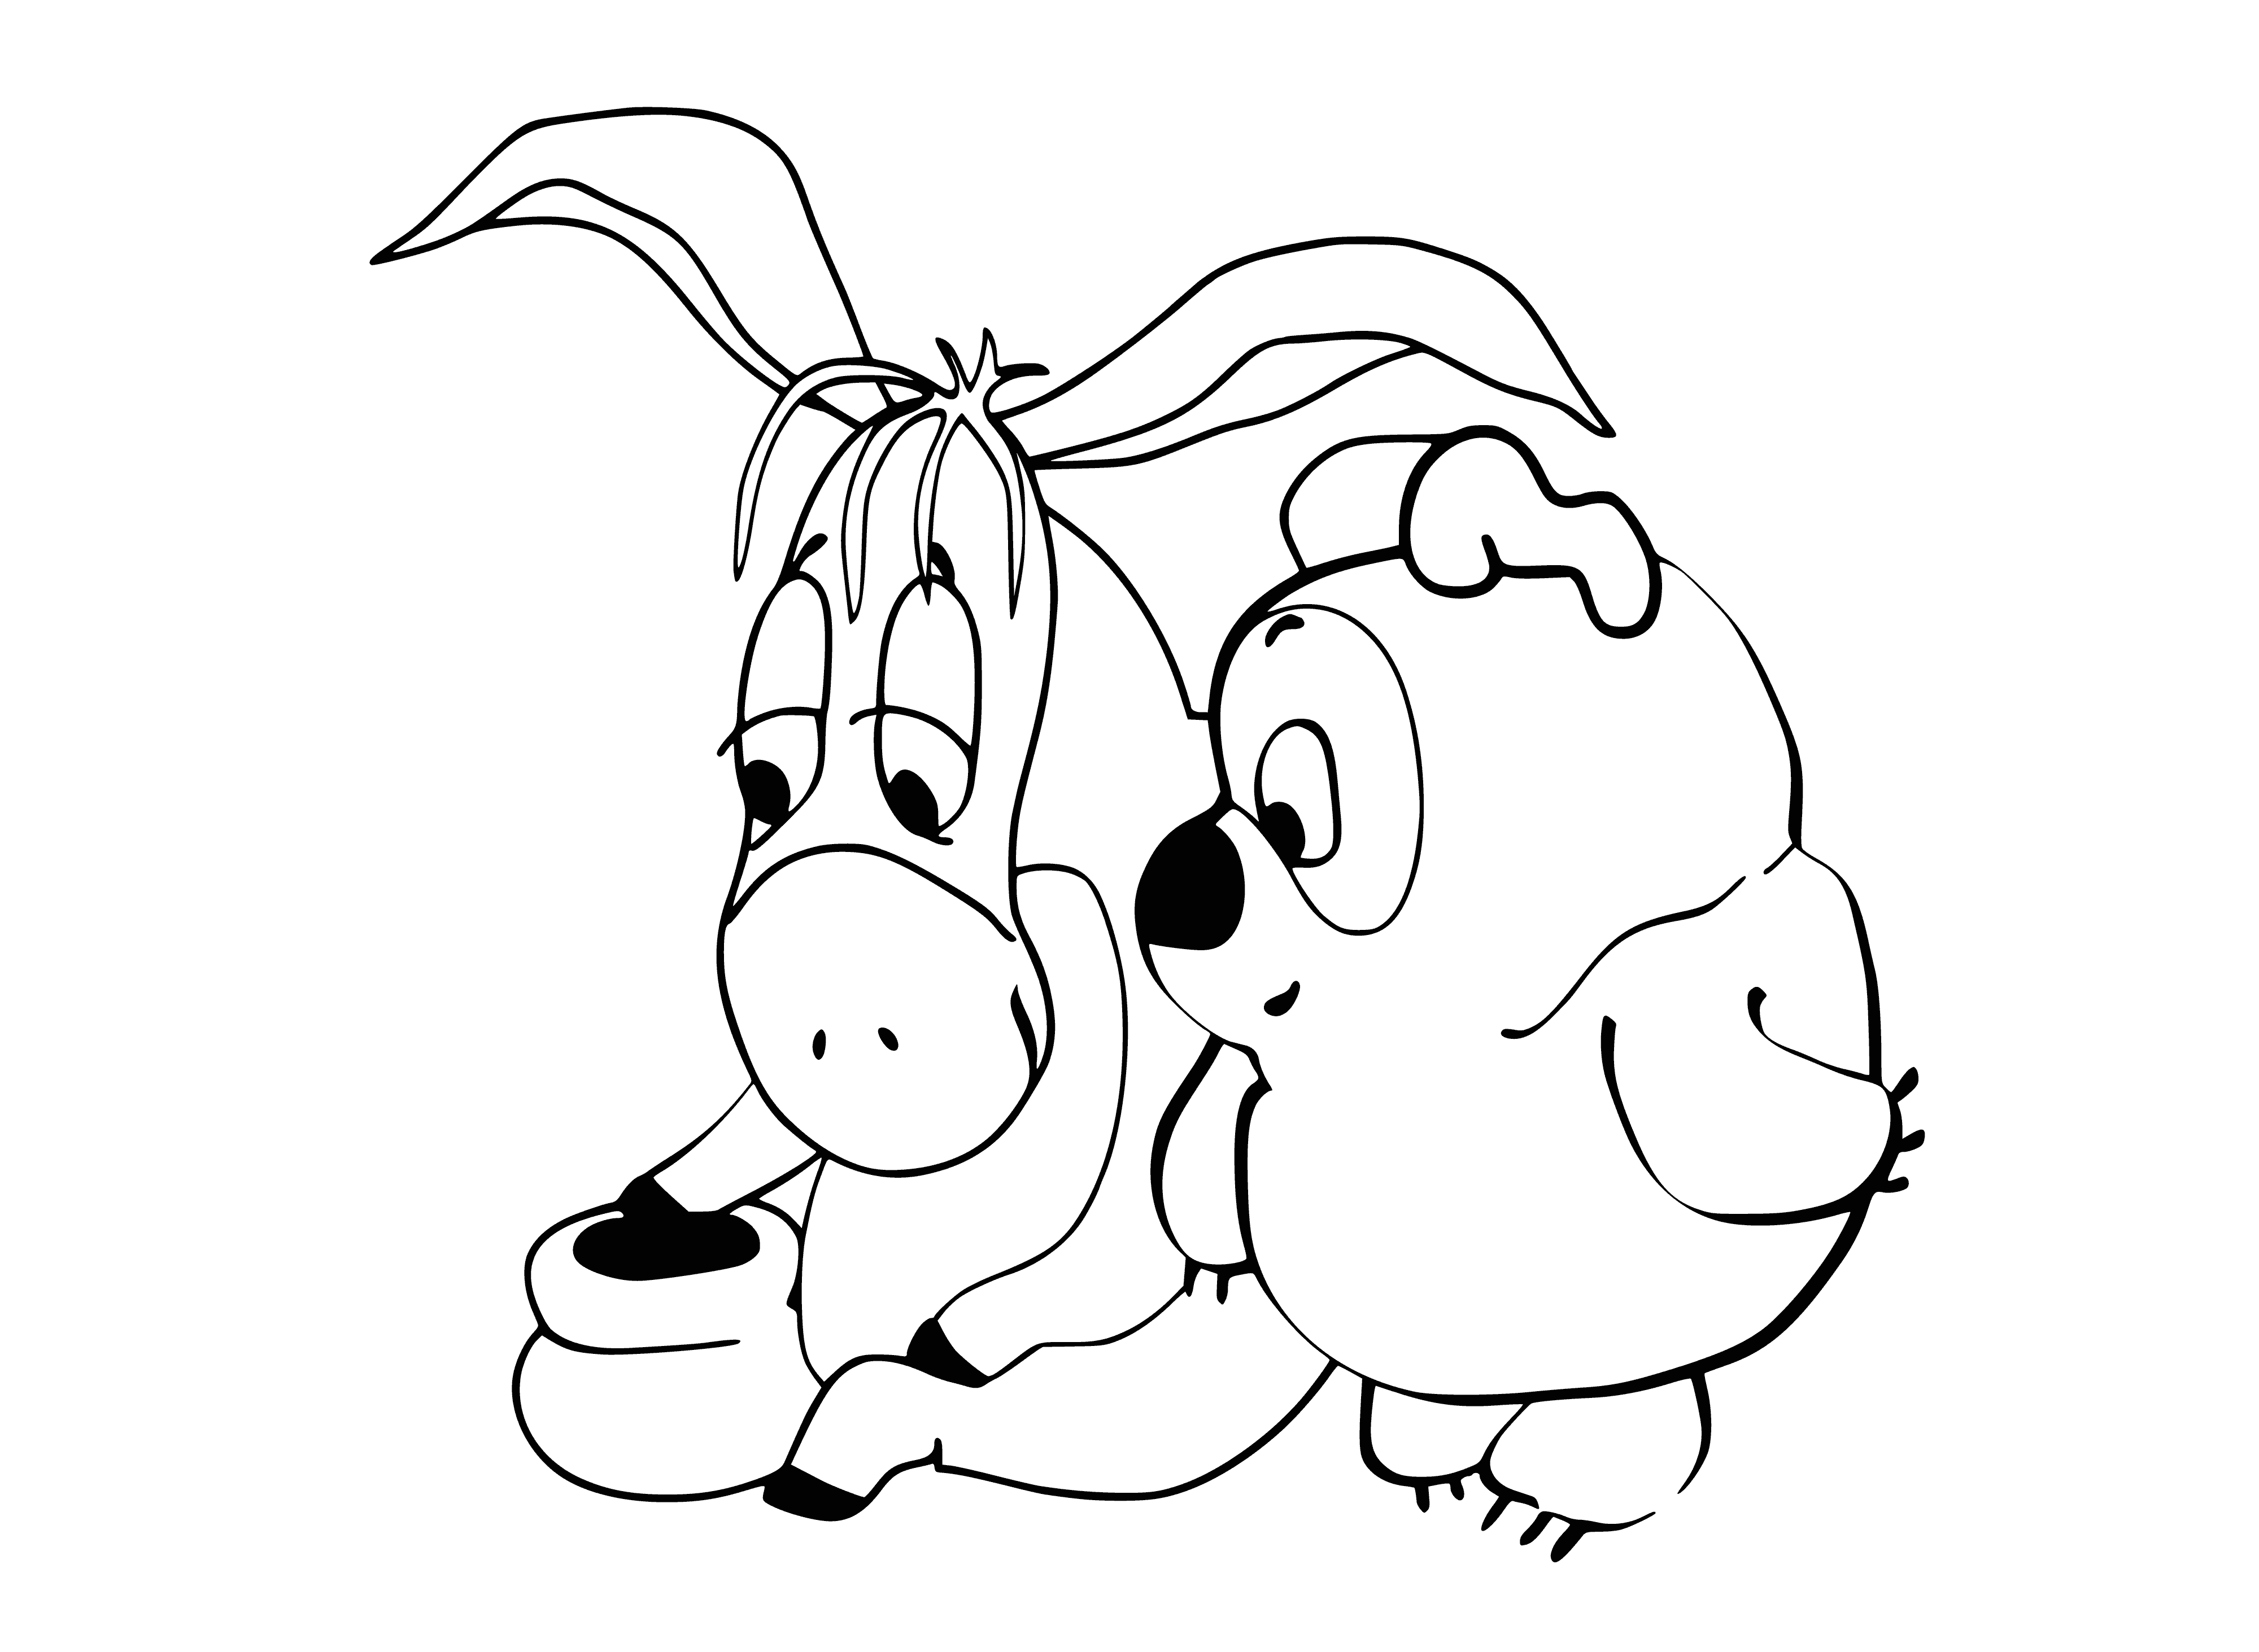 coloring page: Coloring page with Eeyore (gray donkey) and Winnie the Pooh (yellow bear) standing face-to-face, ready to be colored.